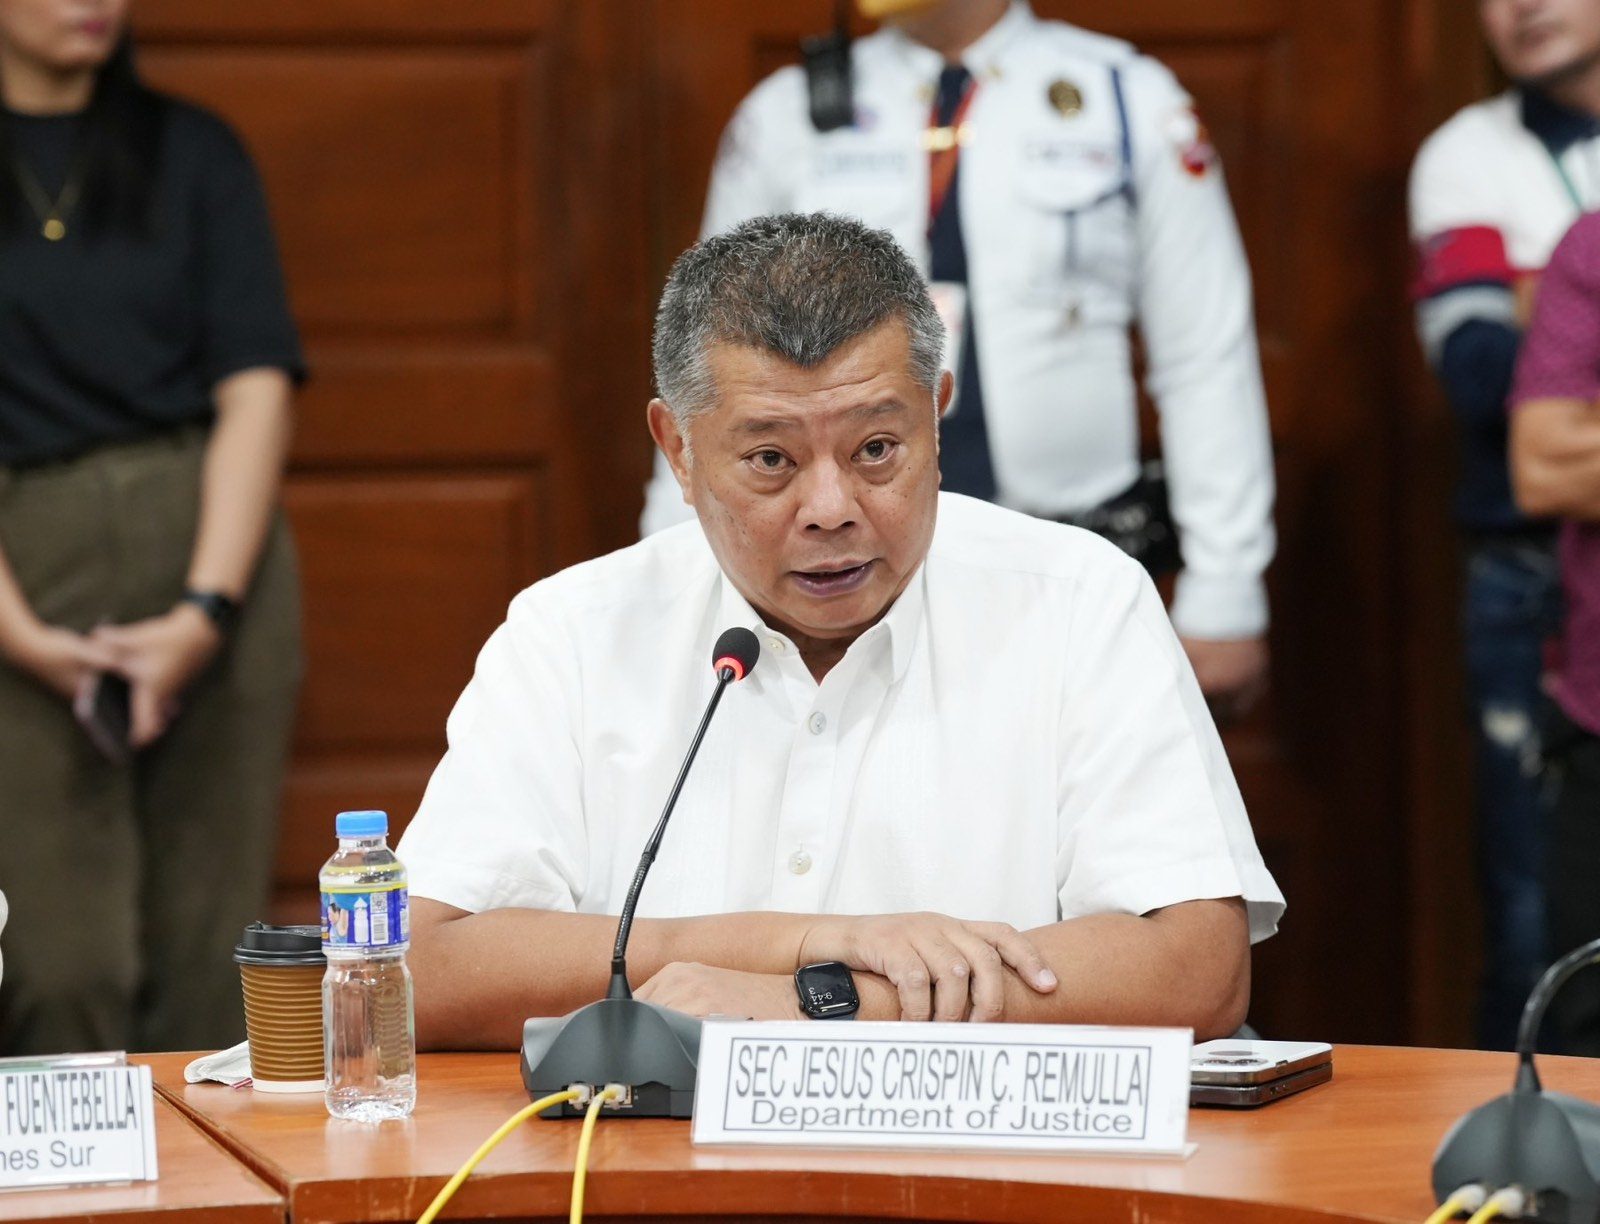 From tough stance, Remulla now says ICC cooperation needs ‘serious study’